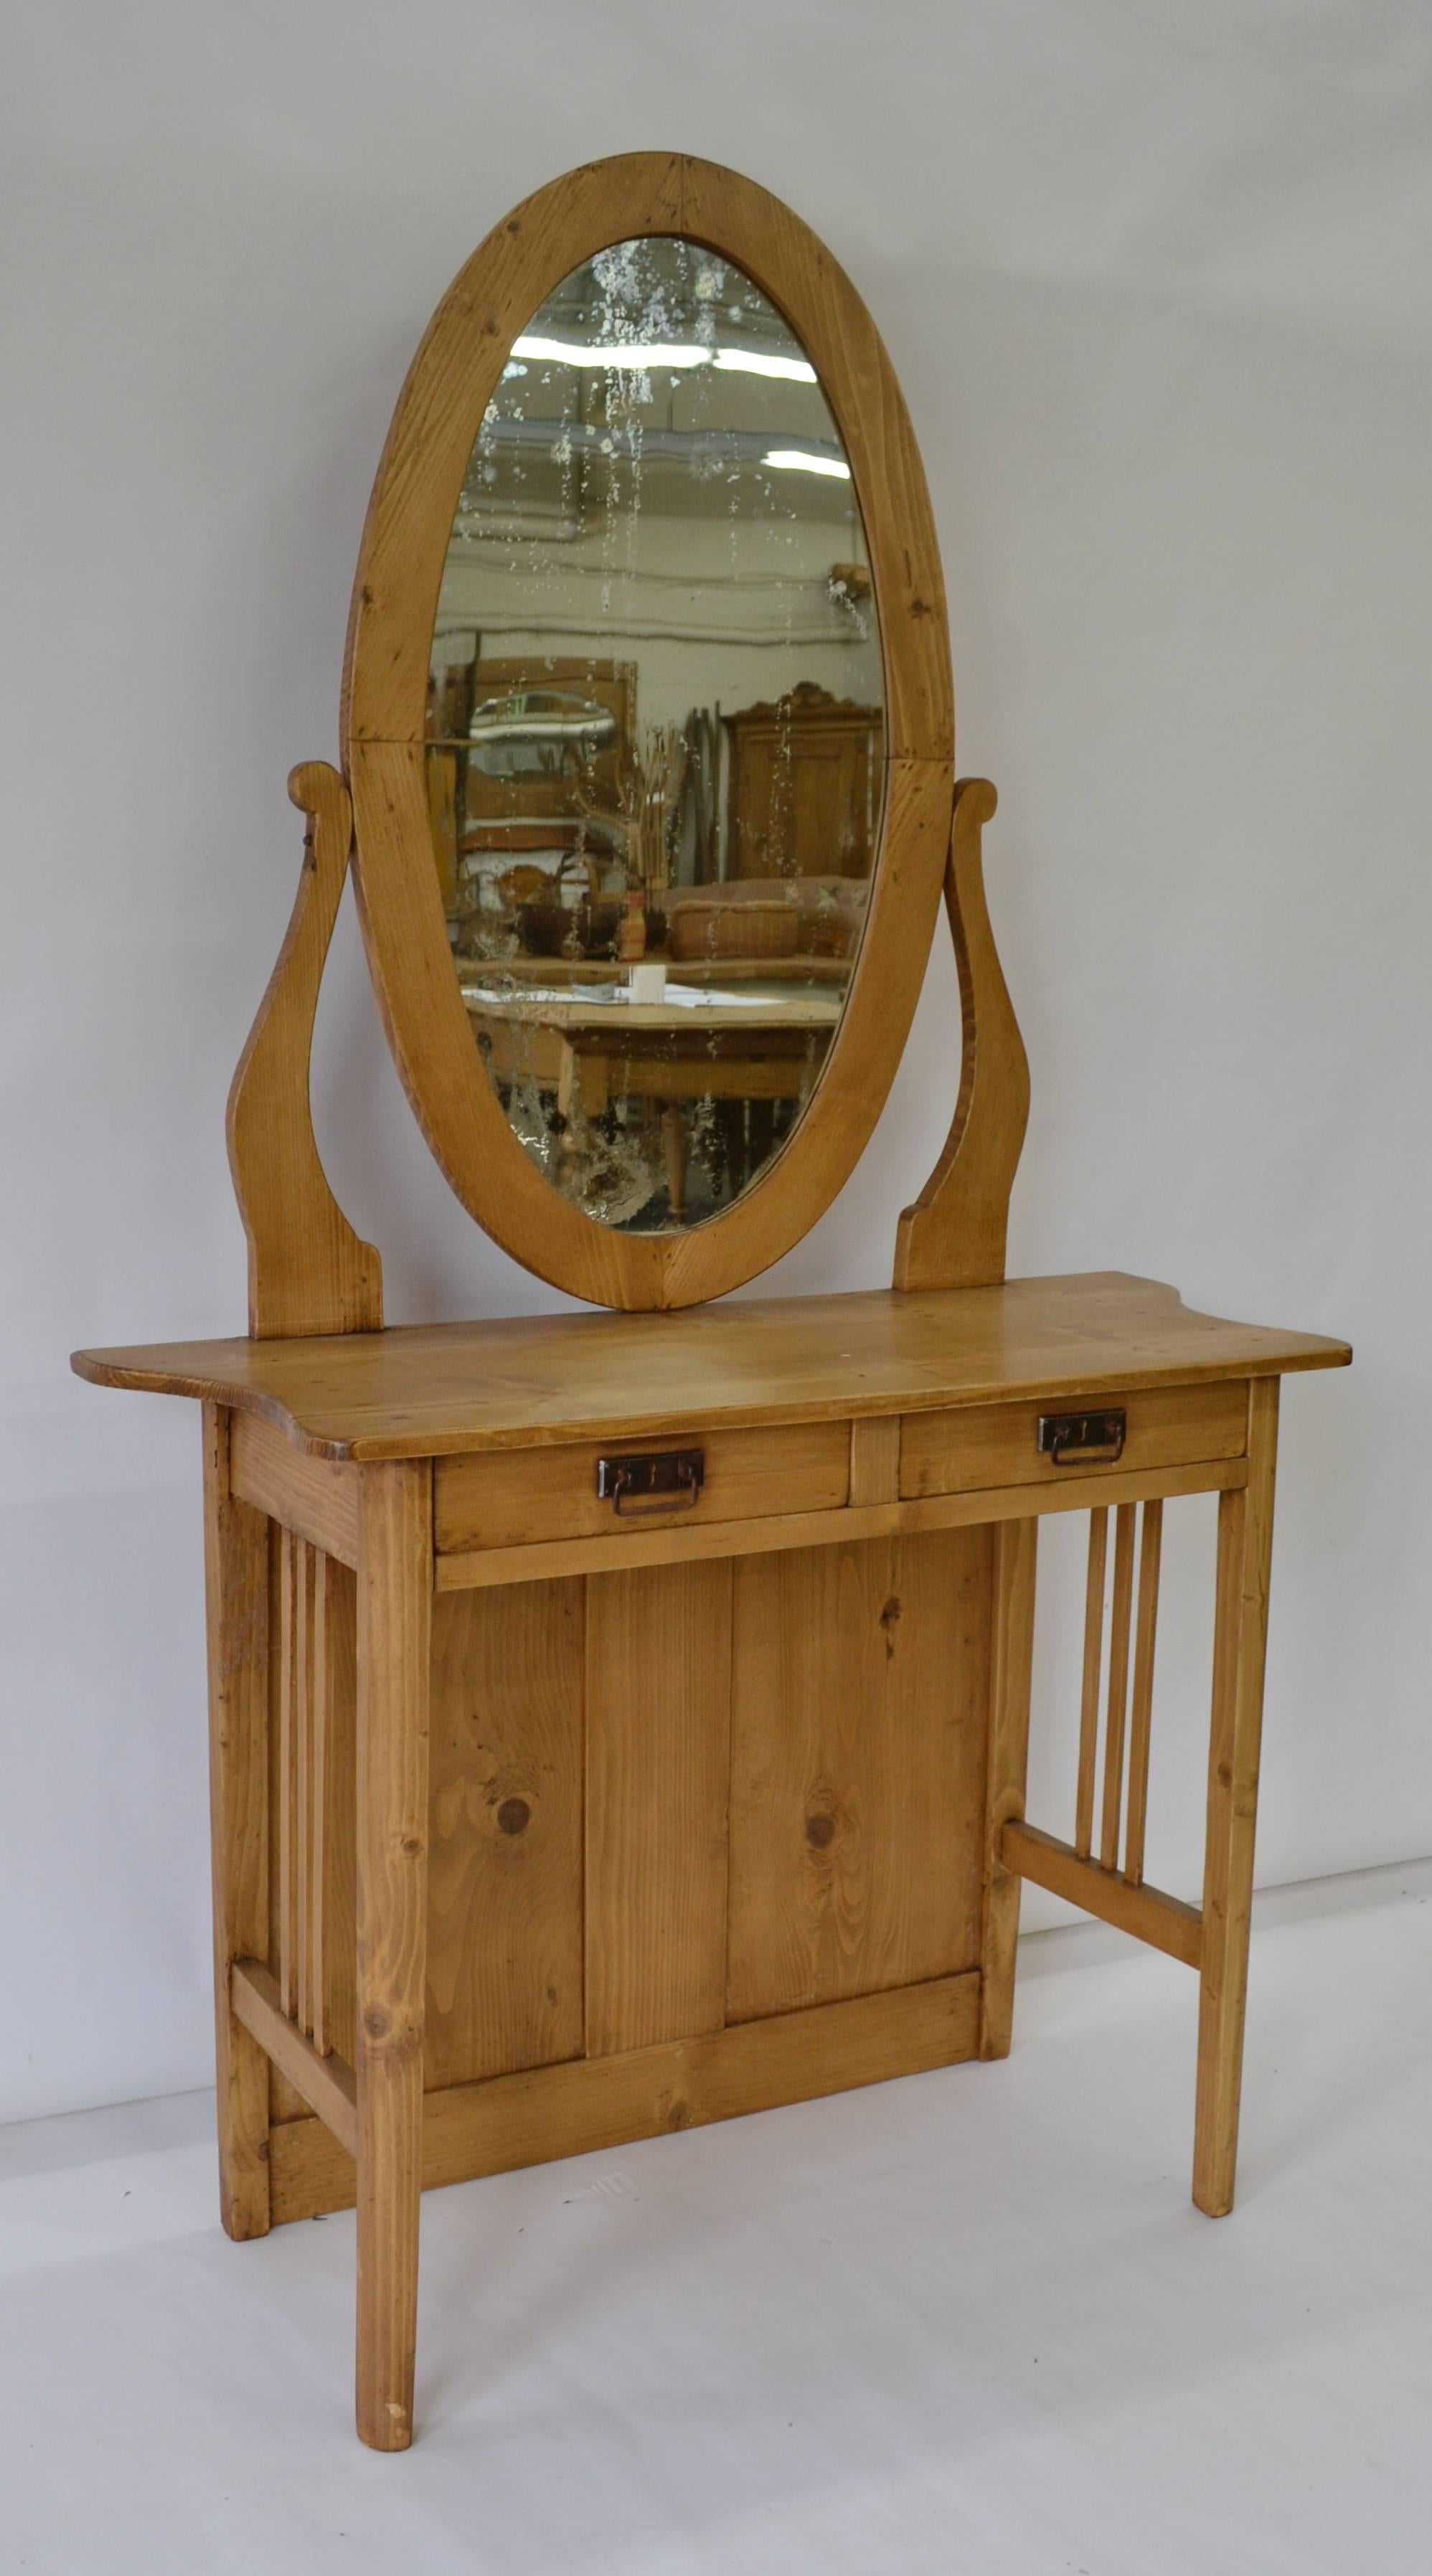 This pretty little dressing table features an oval mirror with original, rather distressed, glass, which pivots on lyre-shaped supports. The shallow top combines a straight front with serpentine sides and there are two full depth hand-cut dovetailed